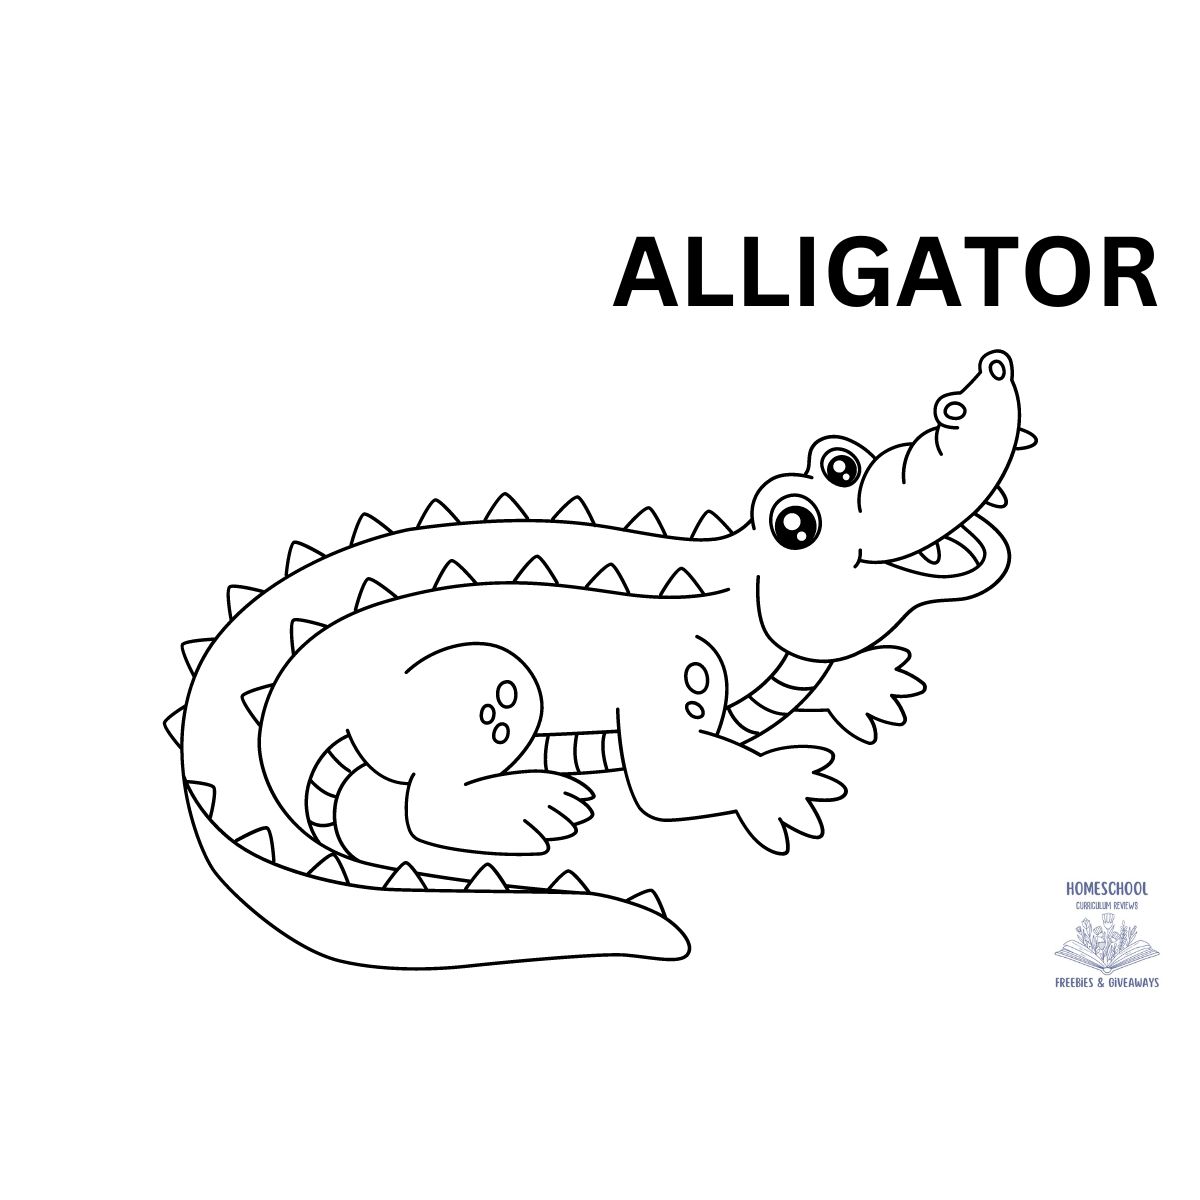 black and white picture of an alligator for coloring with the words ALLIGATOR in all caps